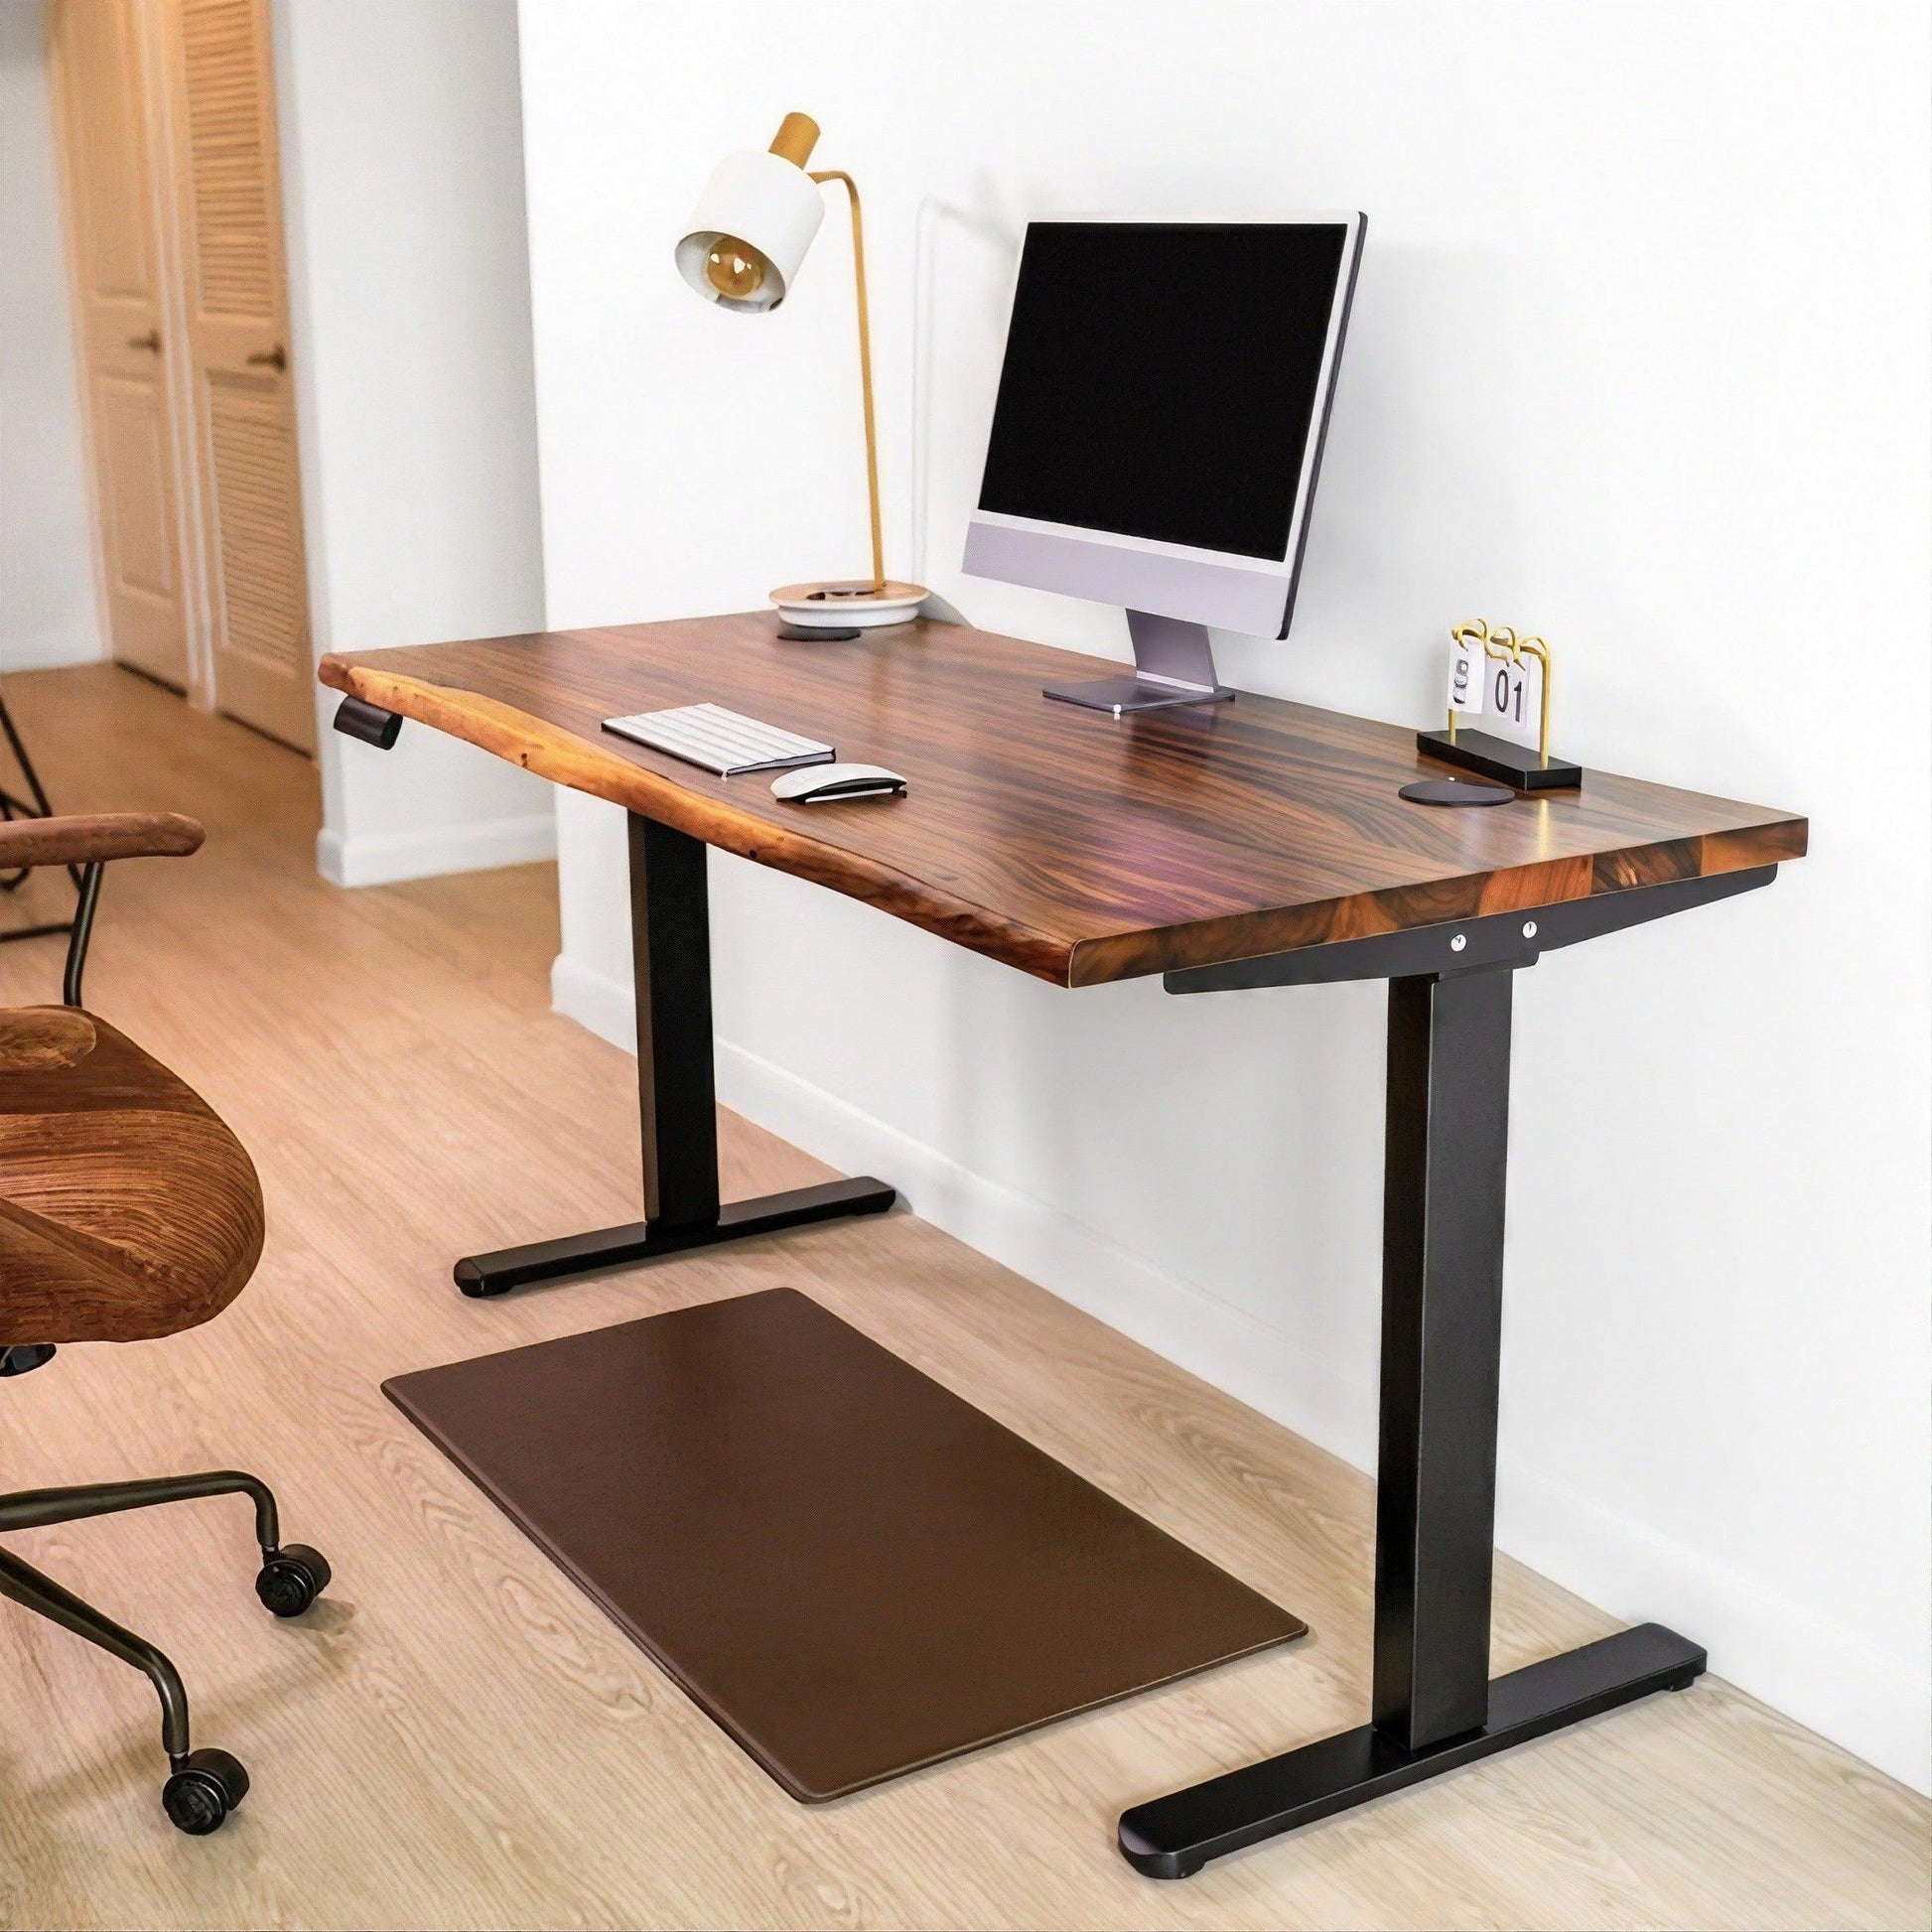 Modern minimalist home office with a sleek standing desk, complemented by a stylish gold lamp and ergonomic mat, creating a productive workspace.